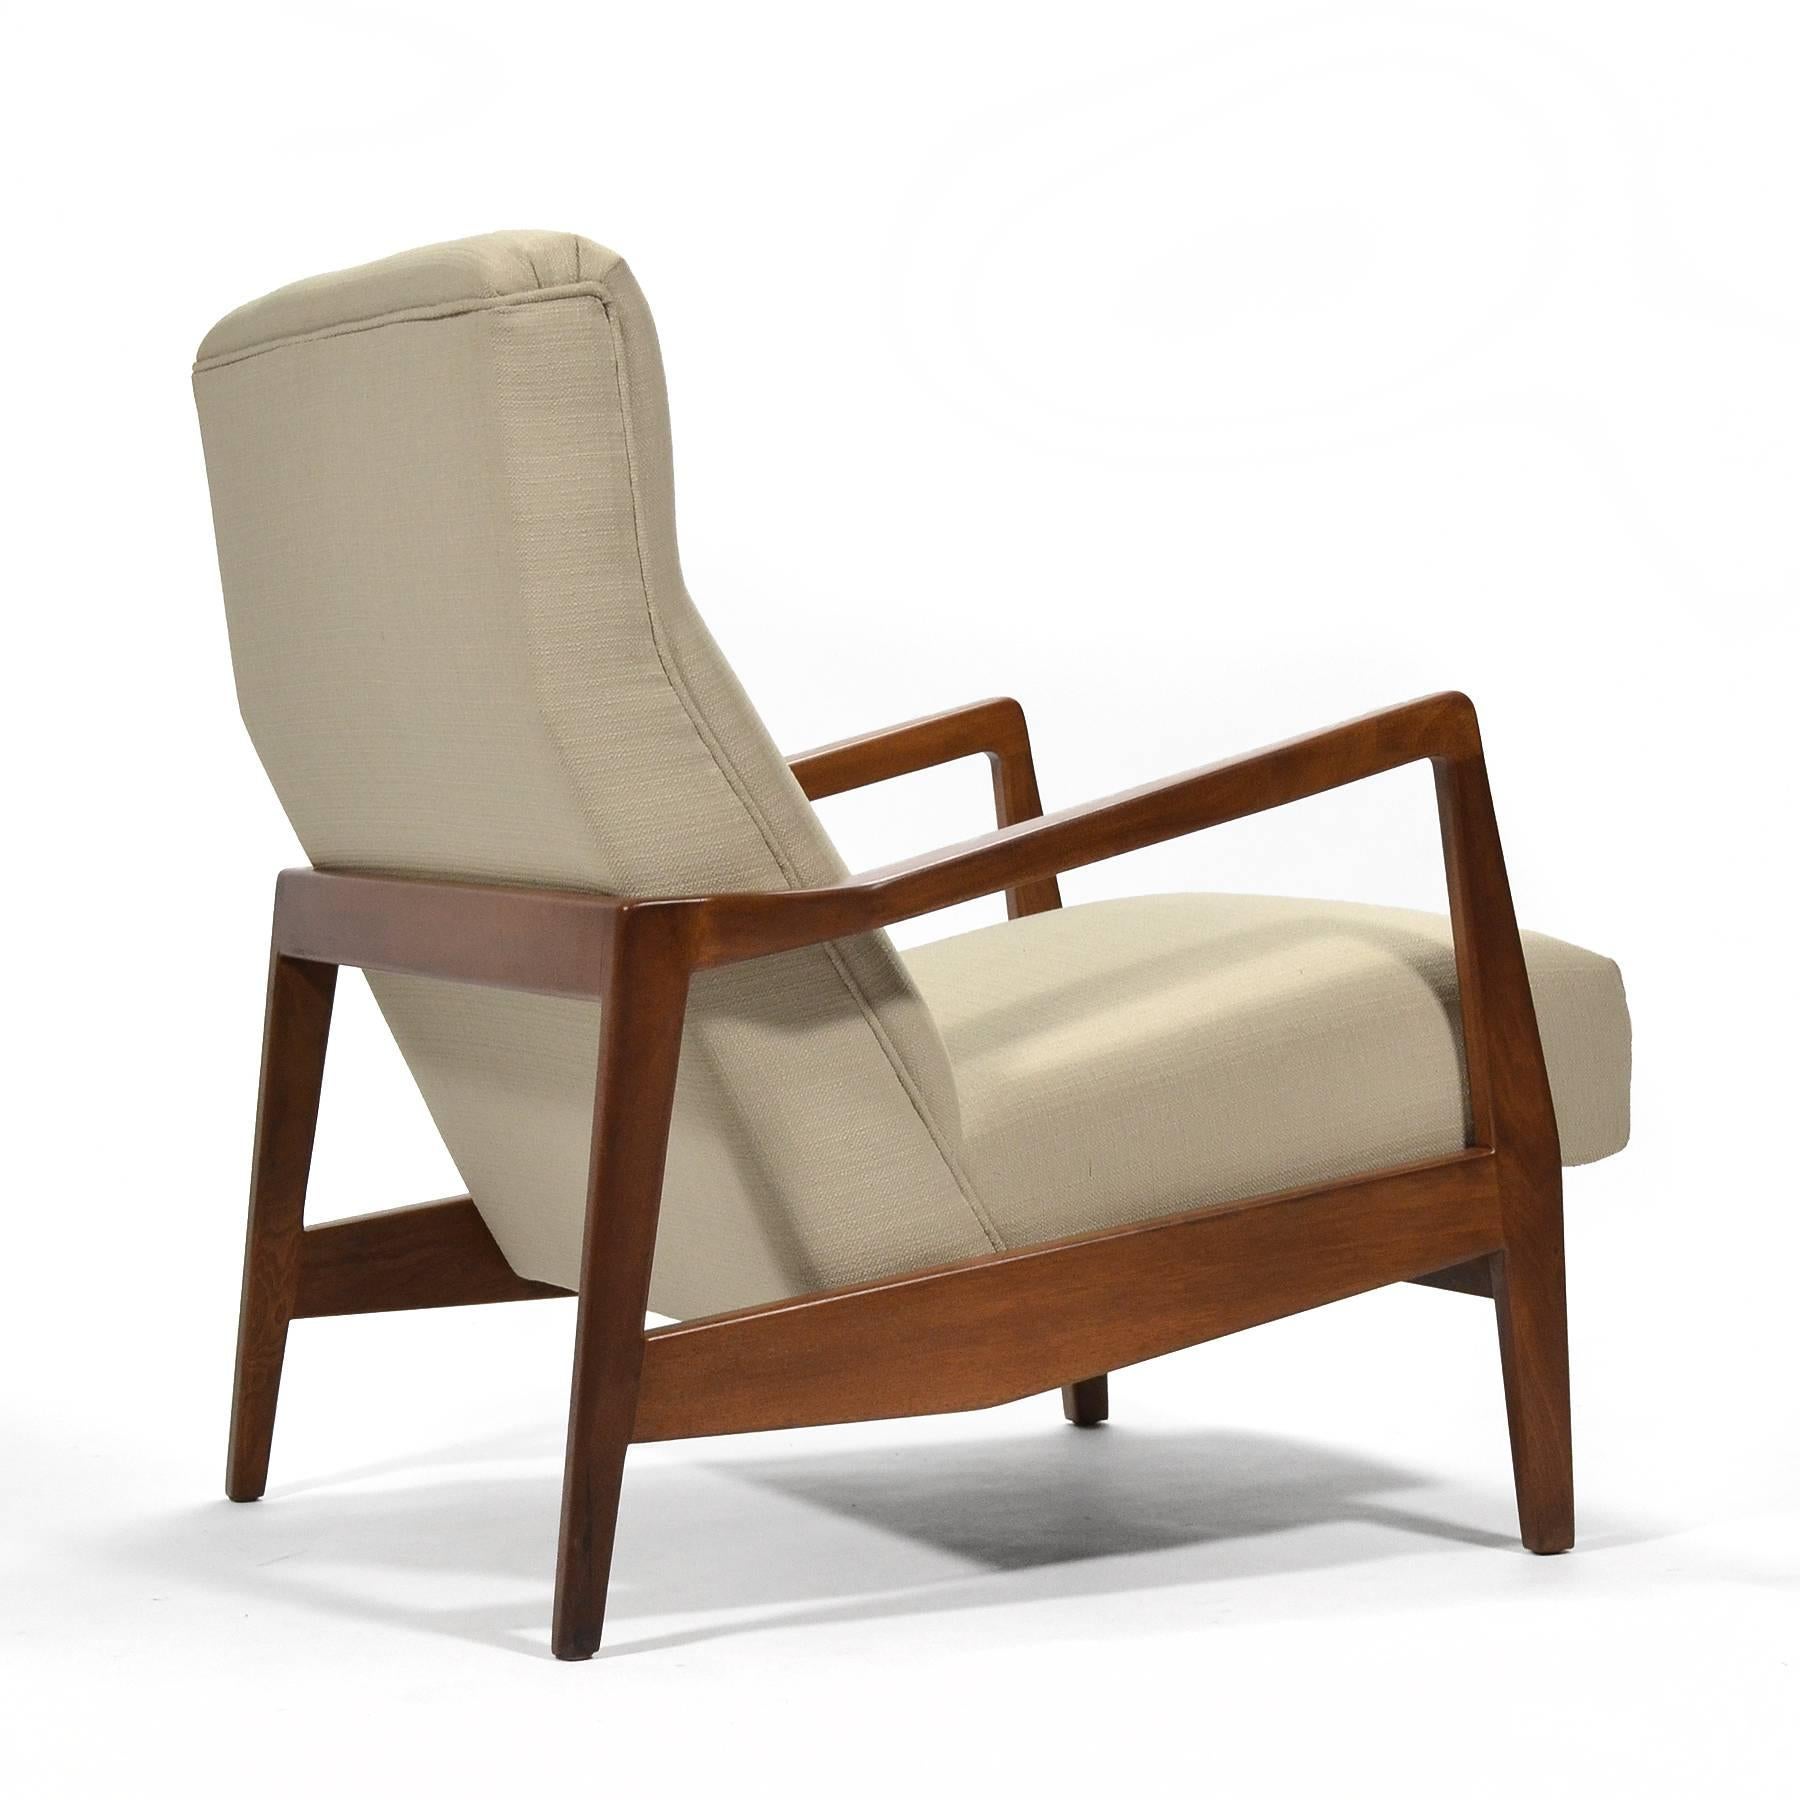 American Jens Risom Pair of Lounge Chairs